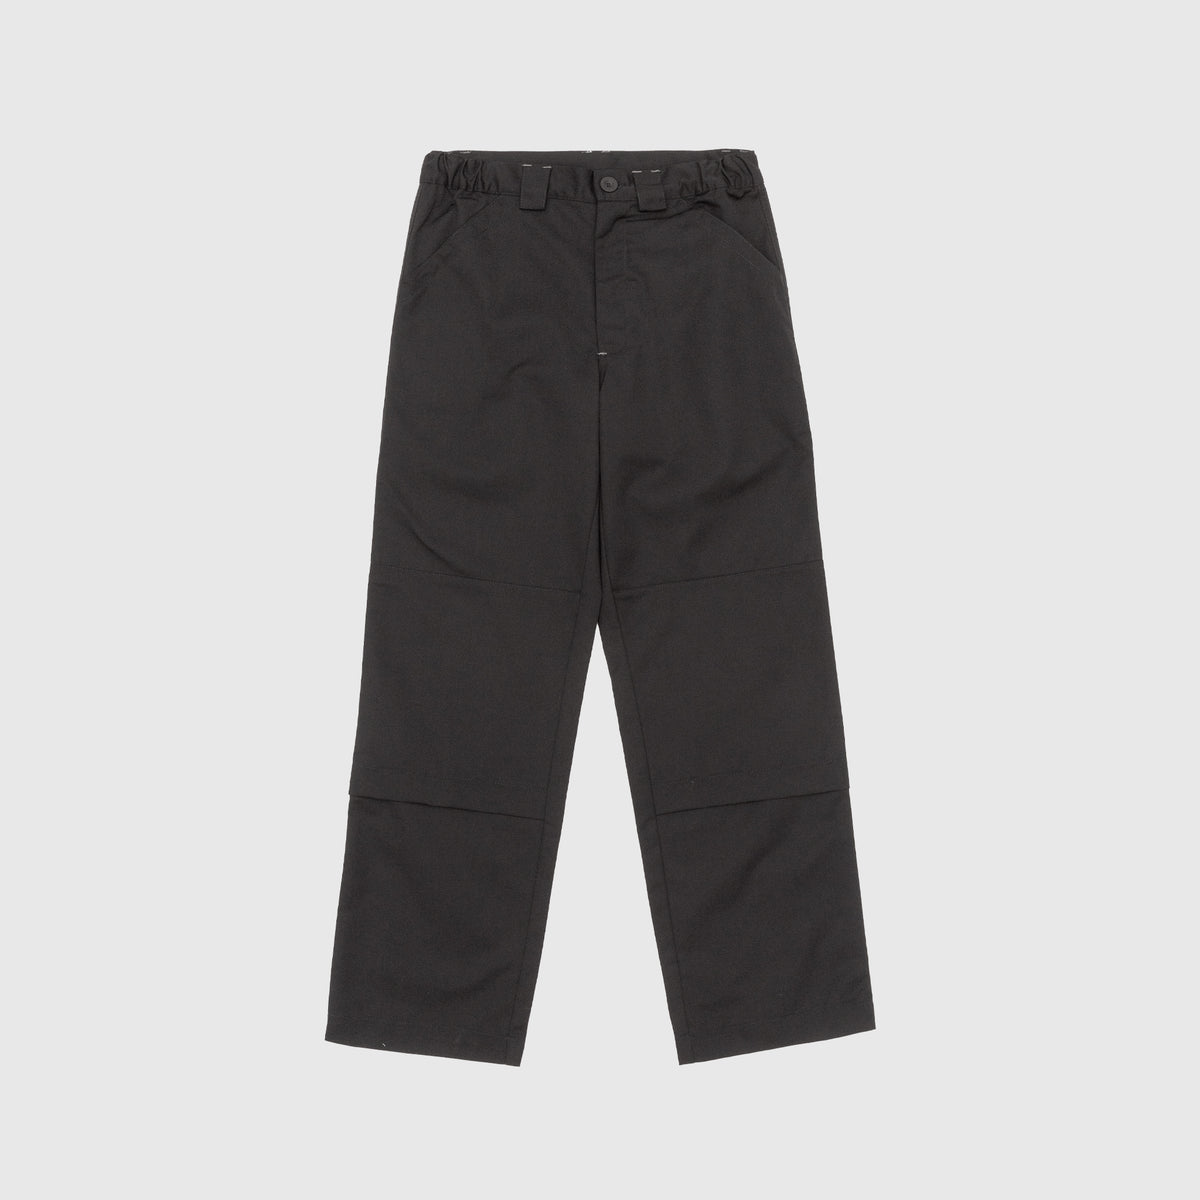 REPLICATED LIGHT KLM PANTS – PACKER SHOES